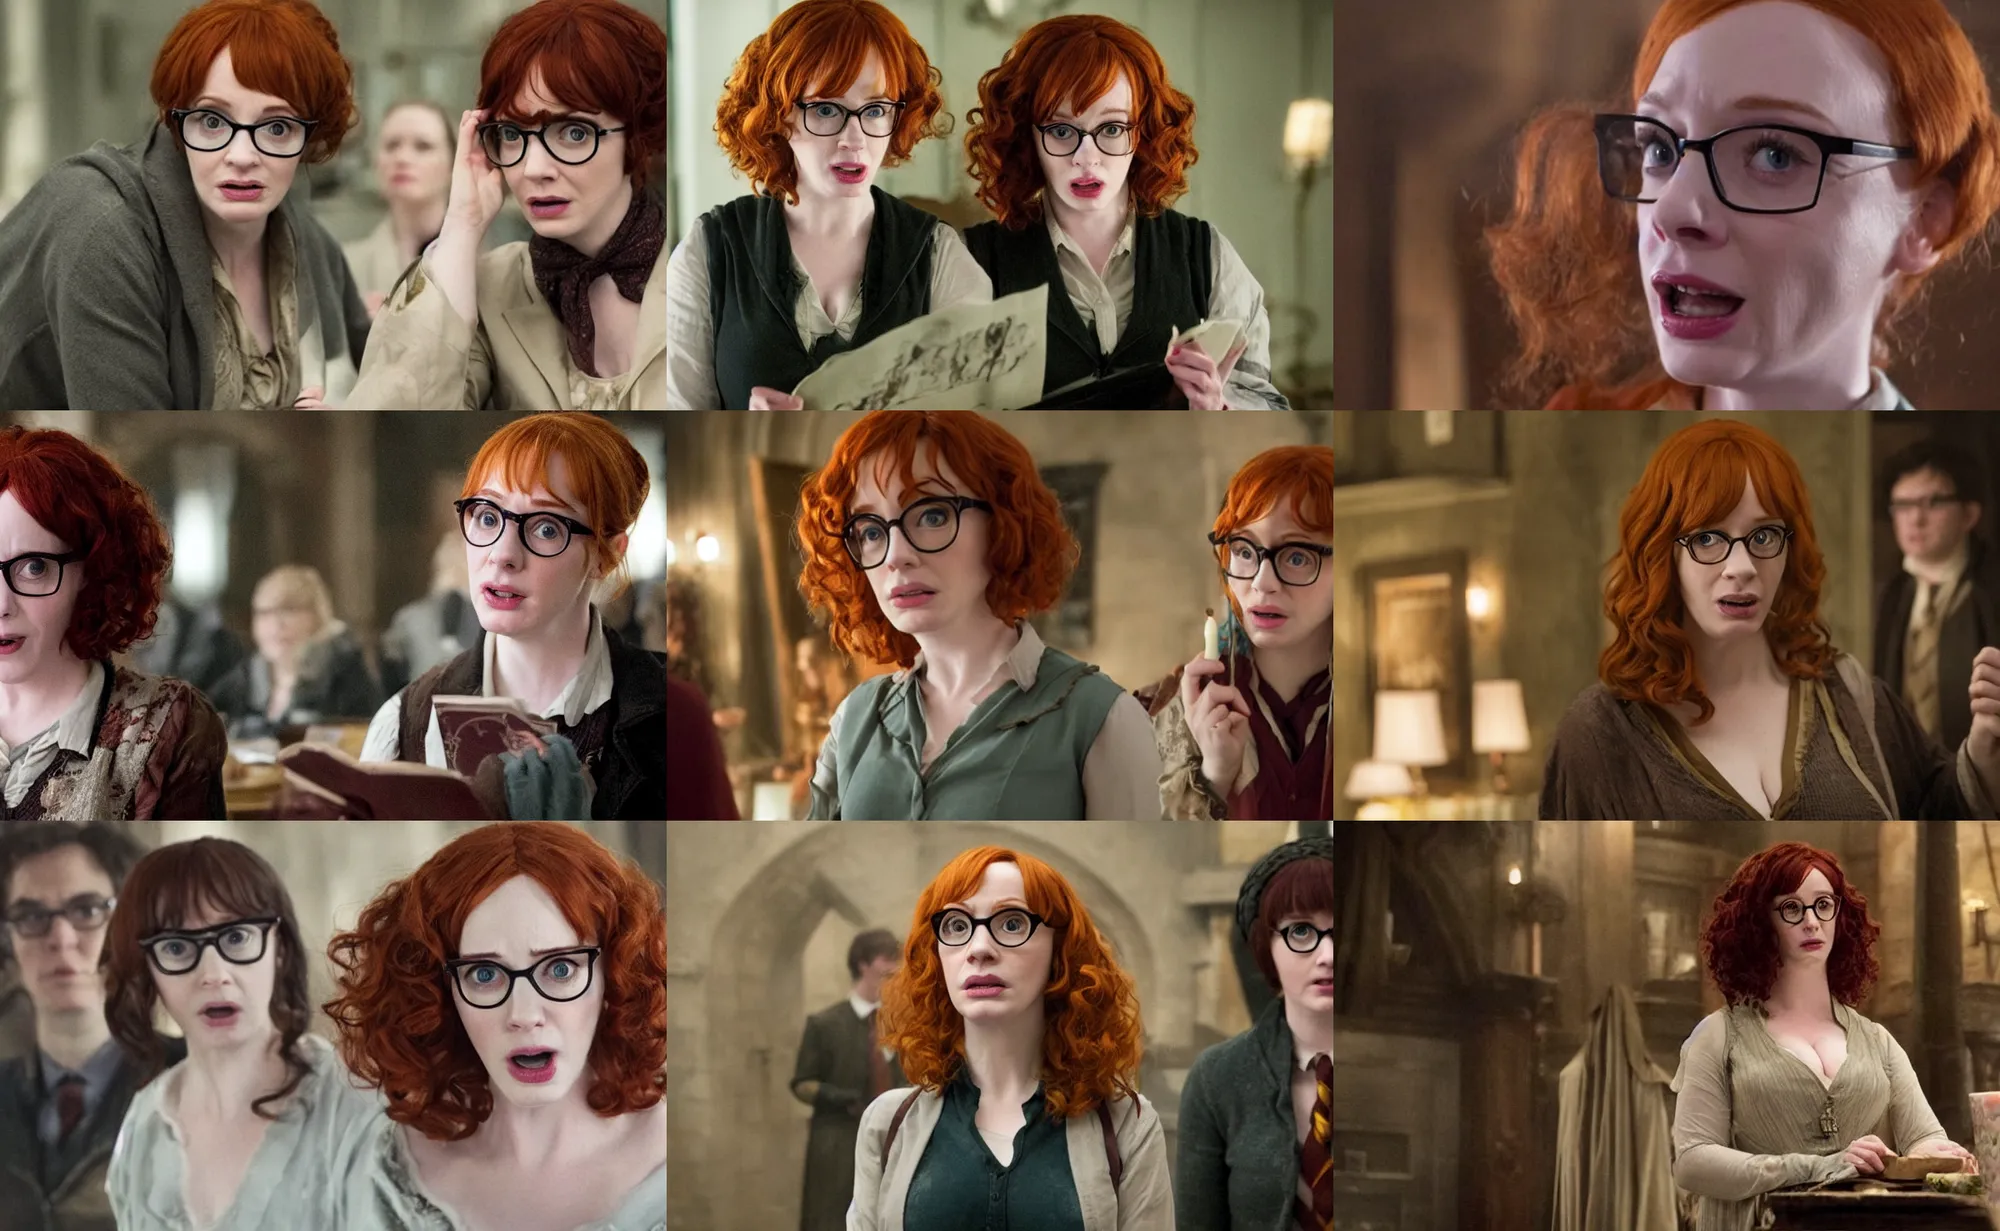 Prompt: movie still of shocked surprised christina hendricks with glasses cosplaying as harry potter from the deathly hallows, directed by david yates